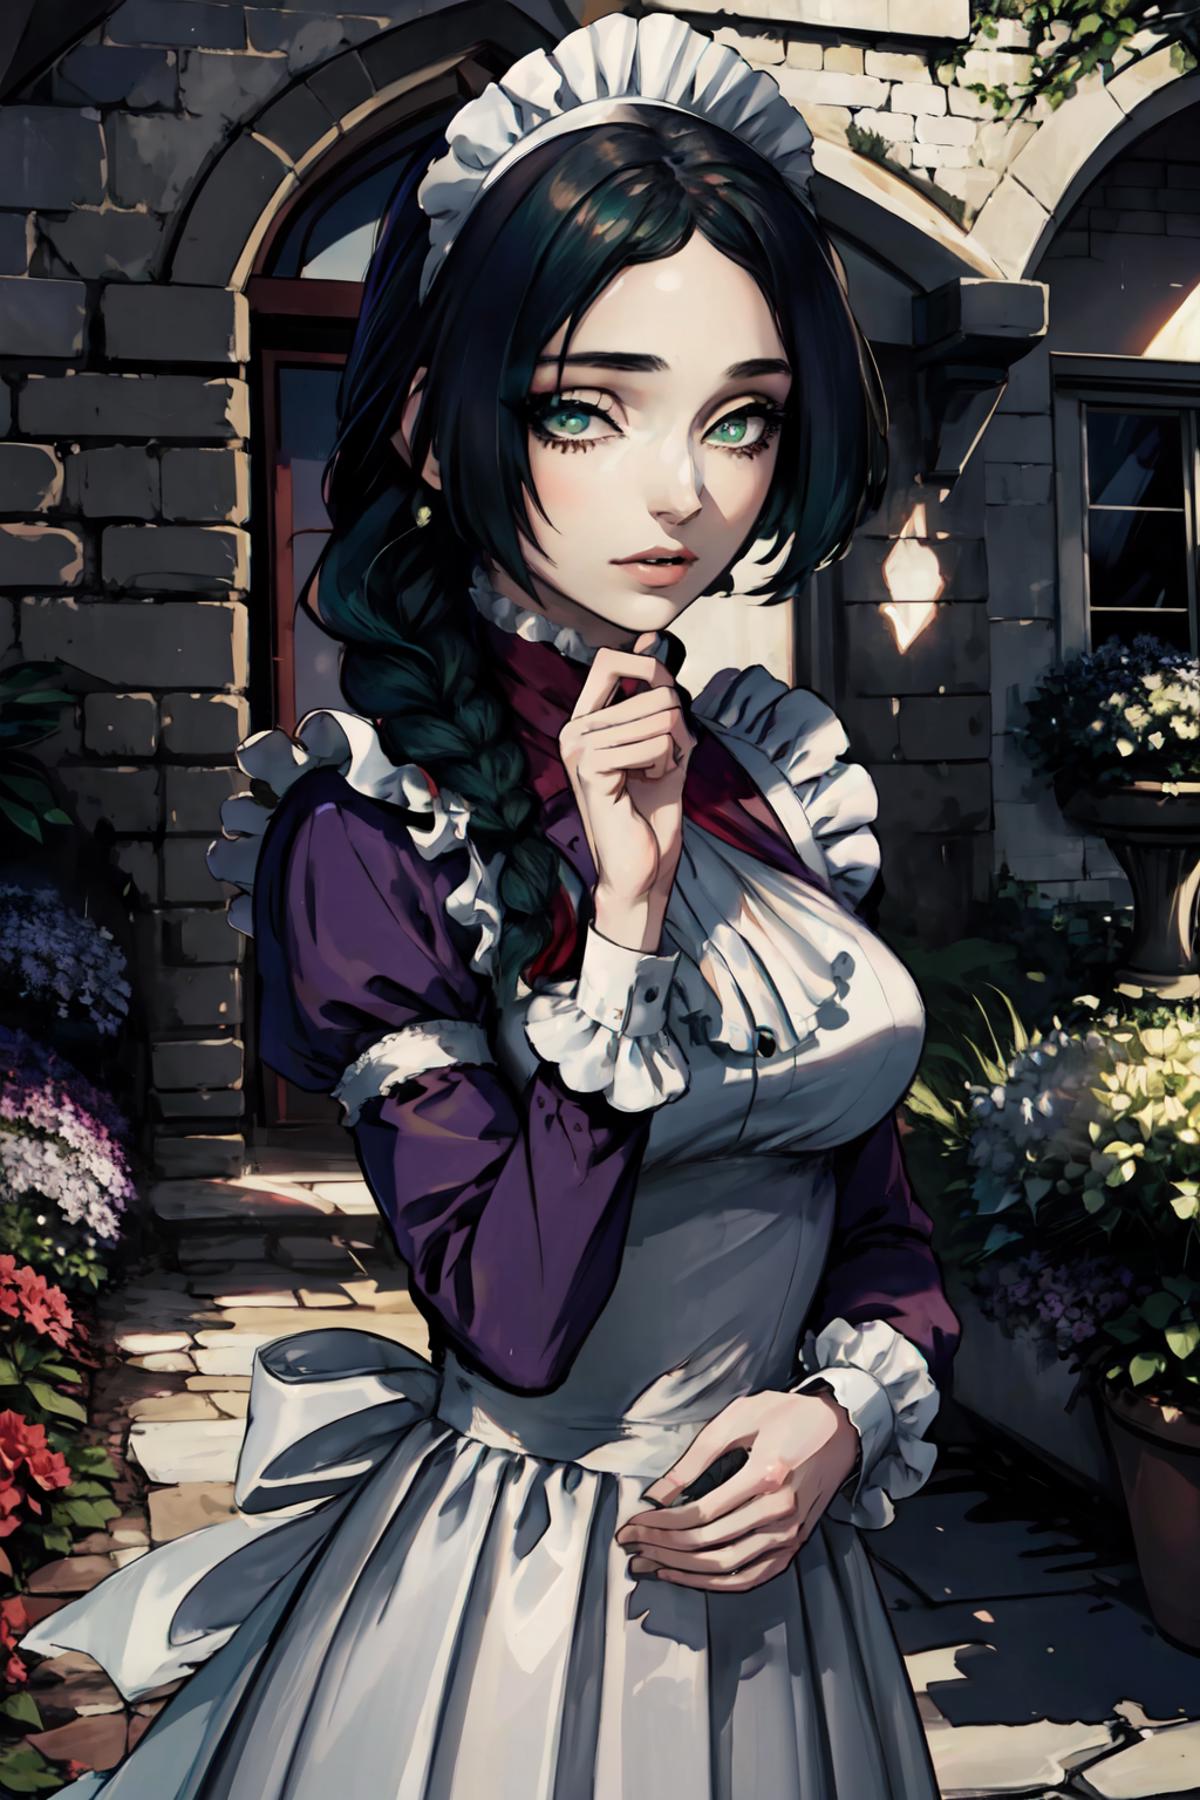 Giselle (The House in Fata Morgana) image by SOSDAN